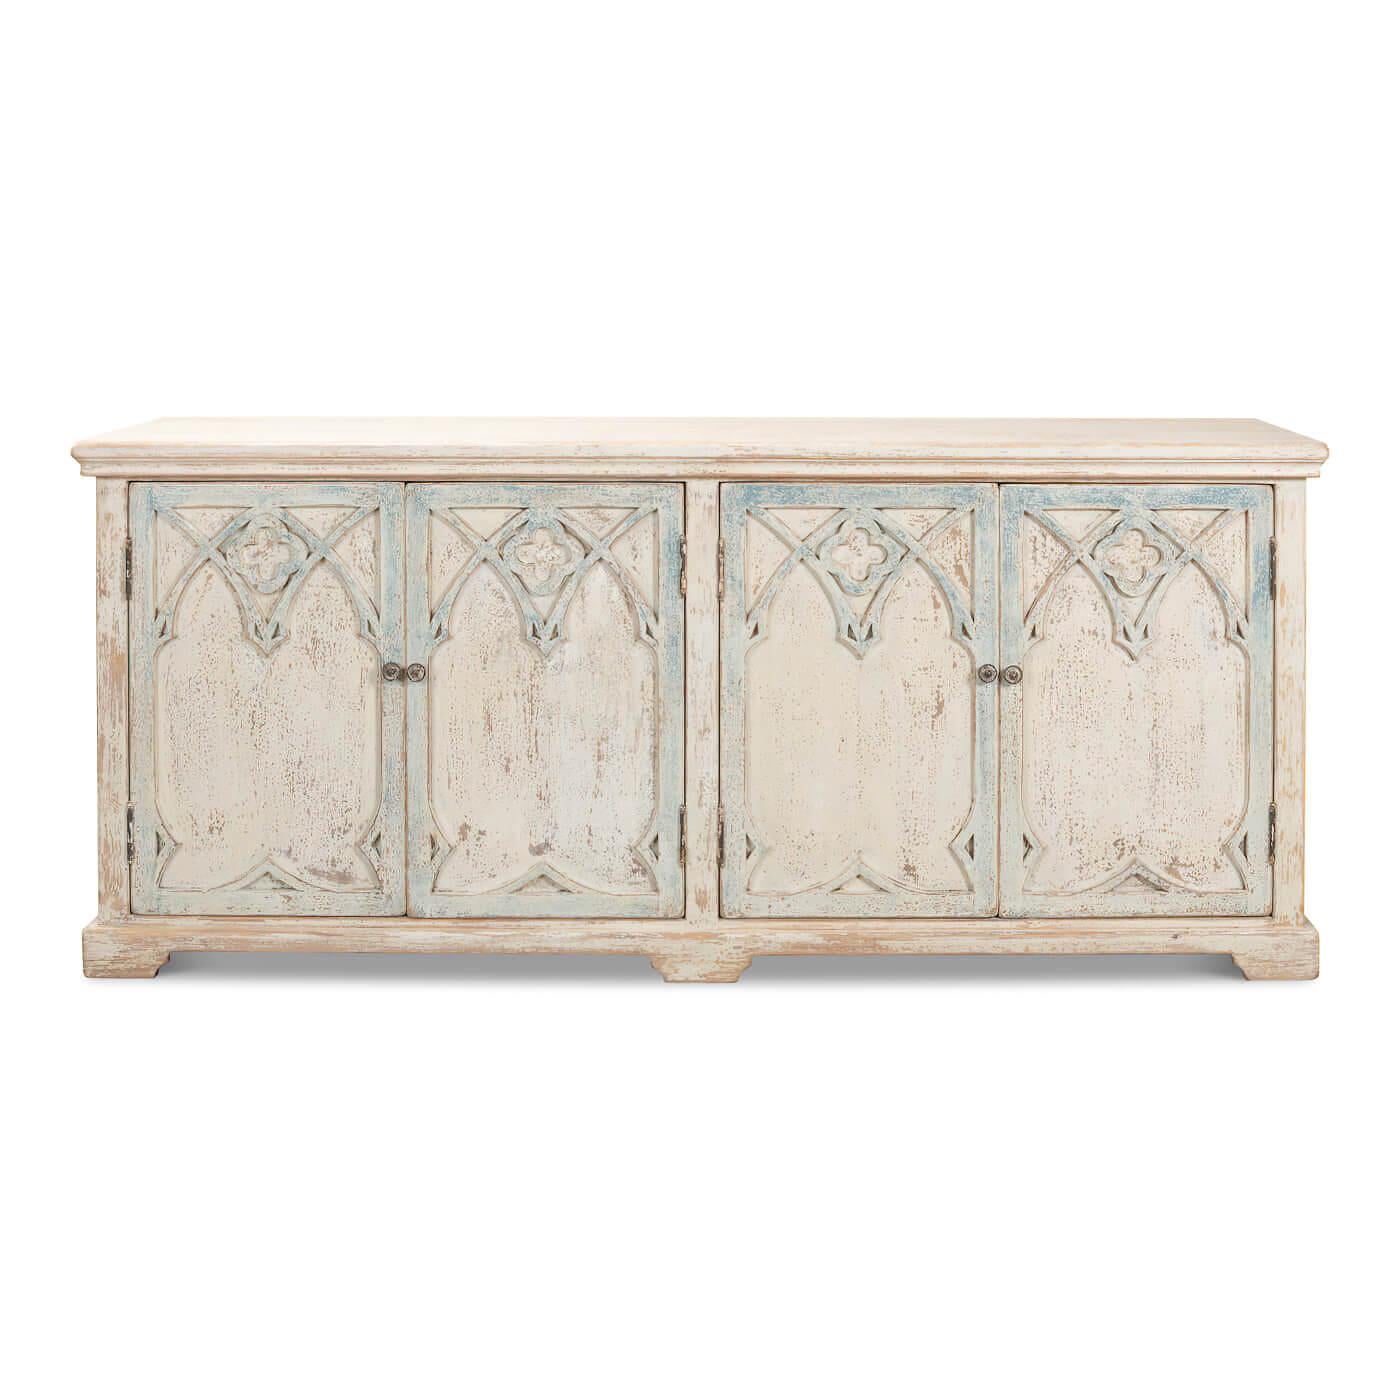 A Rustic French Gothic cabinet. This cabinet has four doors featuring a gothic arch design. A beautiful statement piece, perfect to use as a cabinet or sideboard. 

This piece is crafted in pine and features an antique whitewashed blue finish.